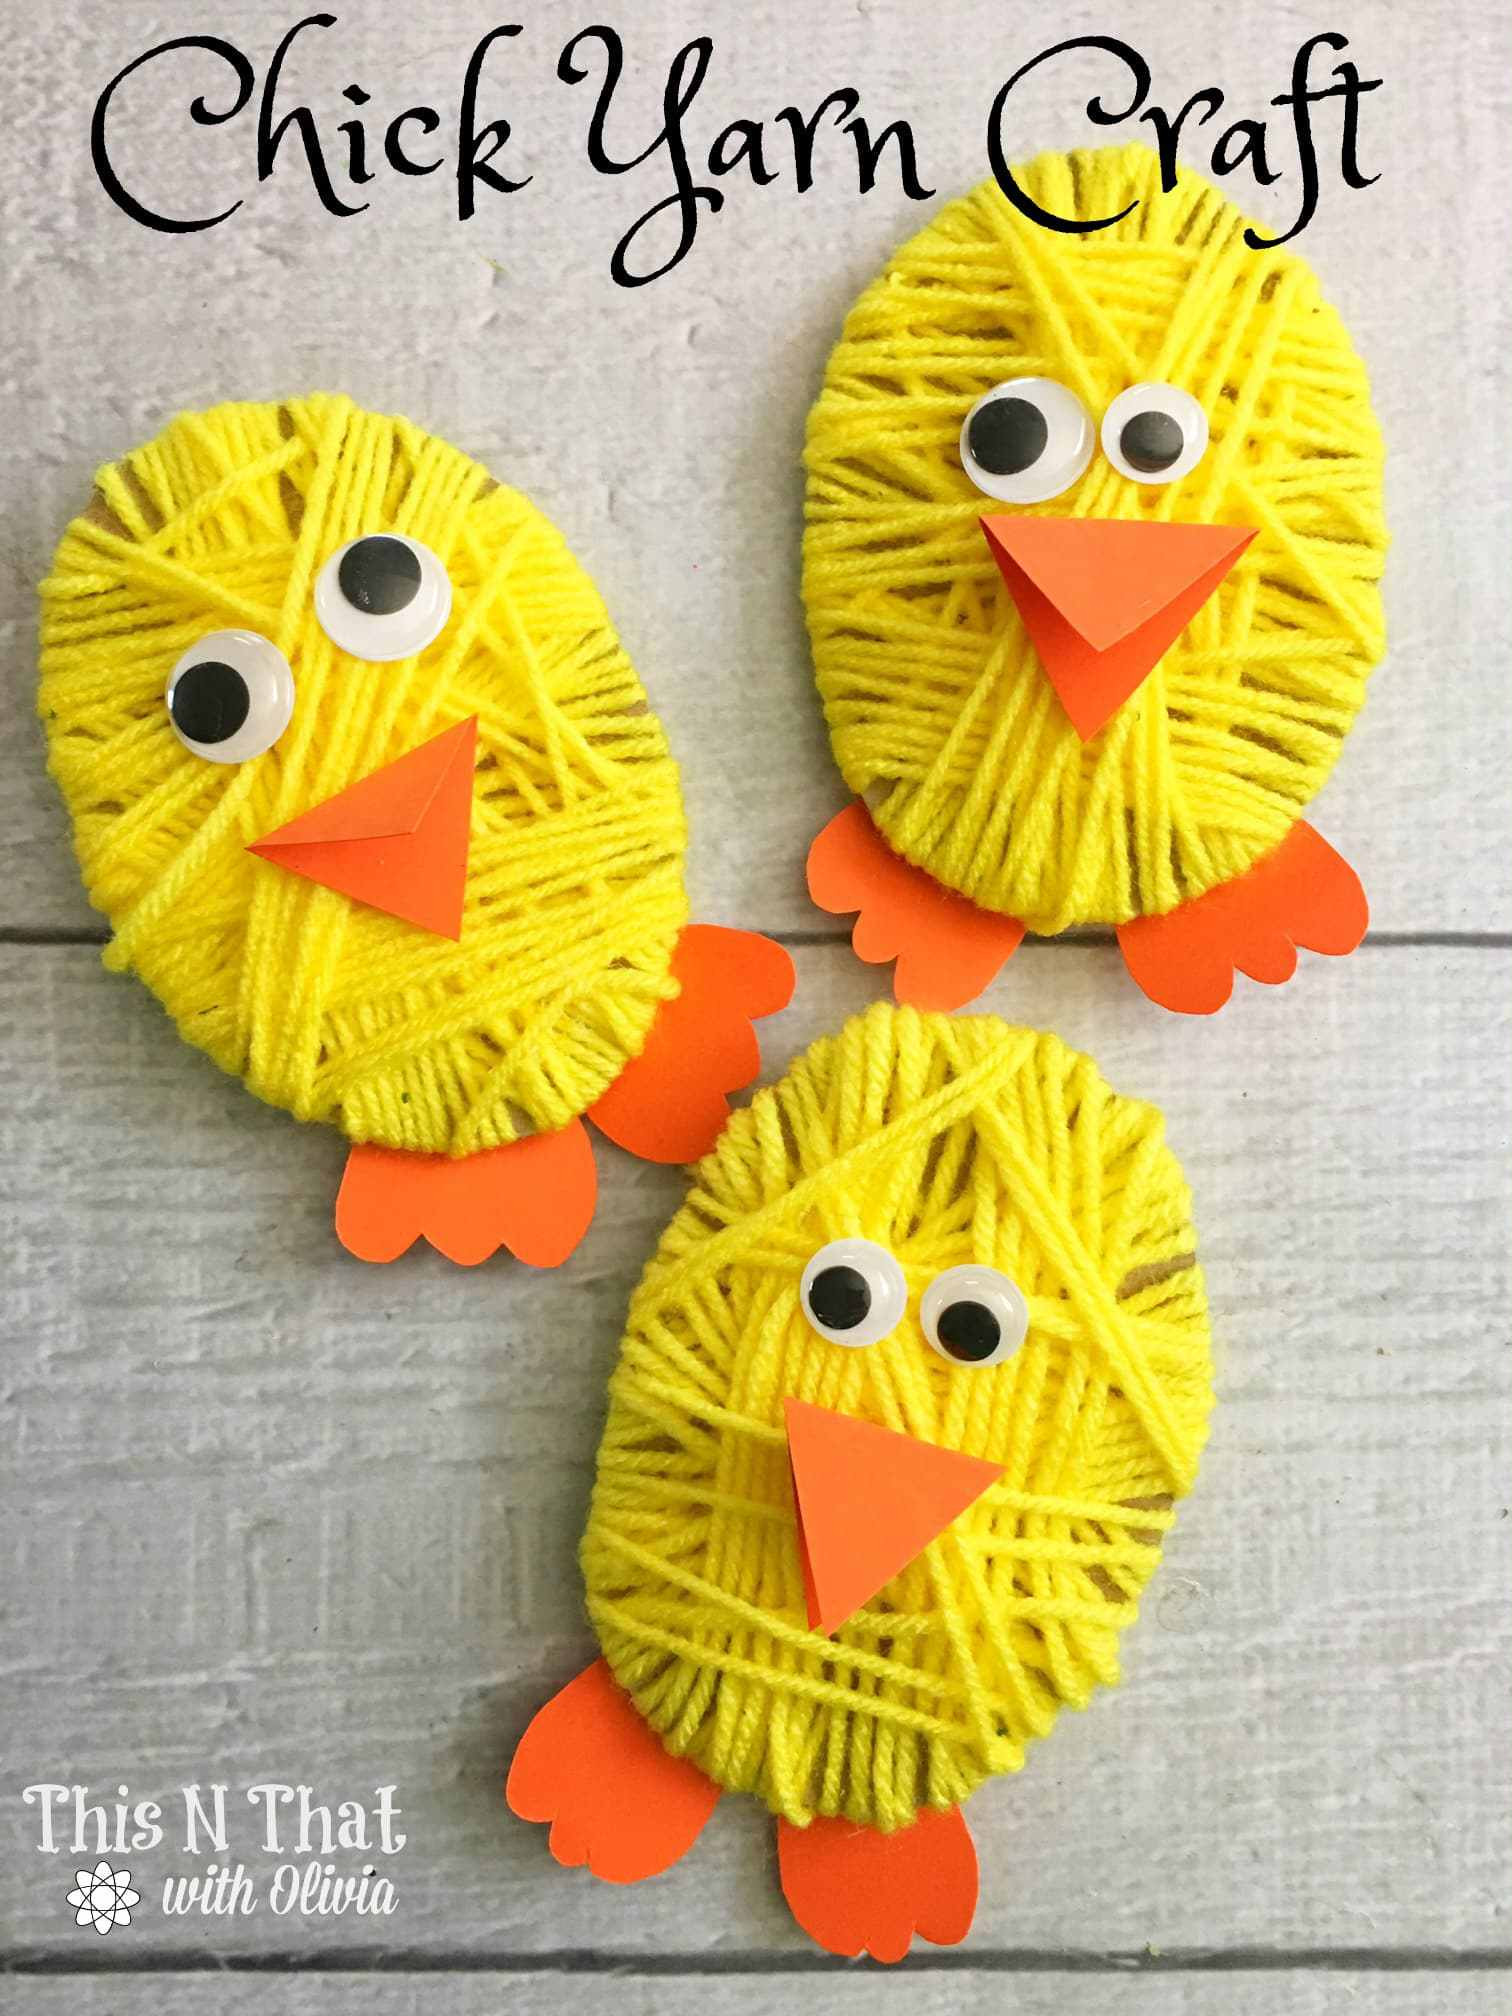 Preschool Crafts Ideas
 Over 33 Easter Craft Ideas for Kids to Make Simple Cute